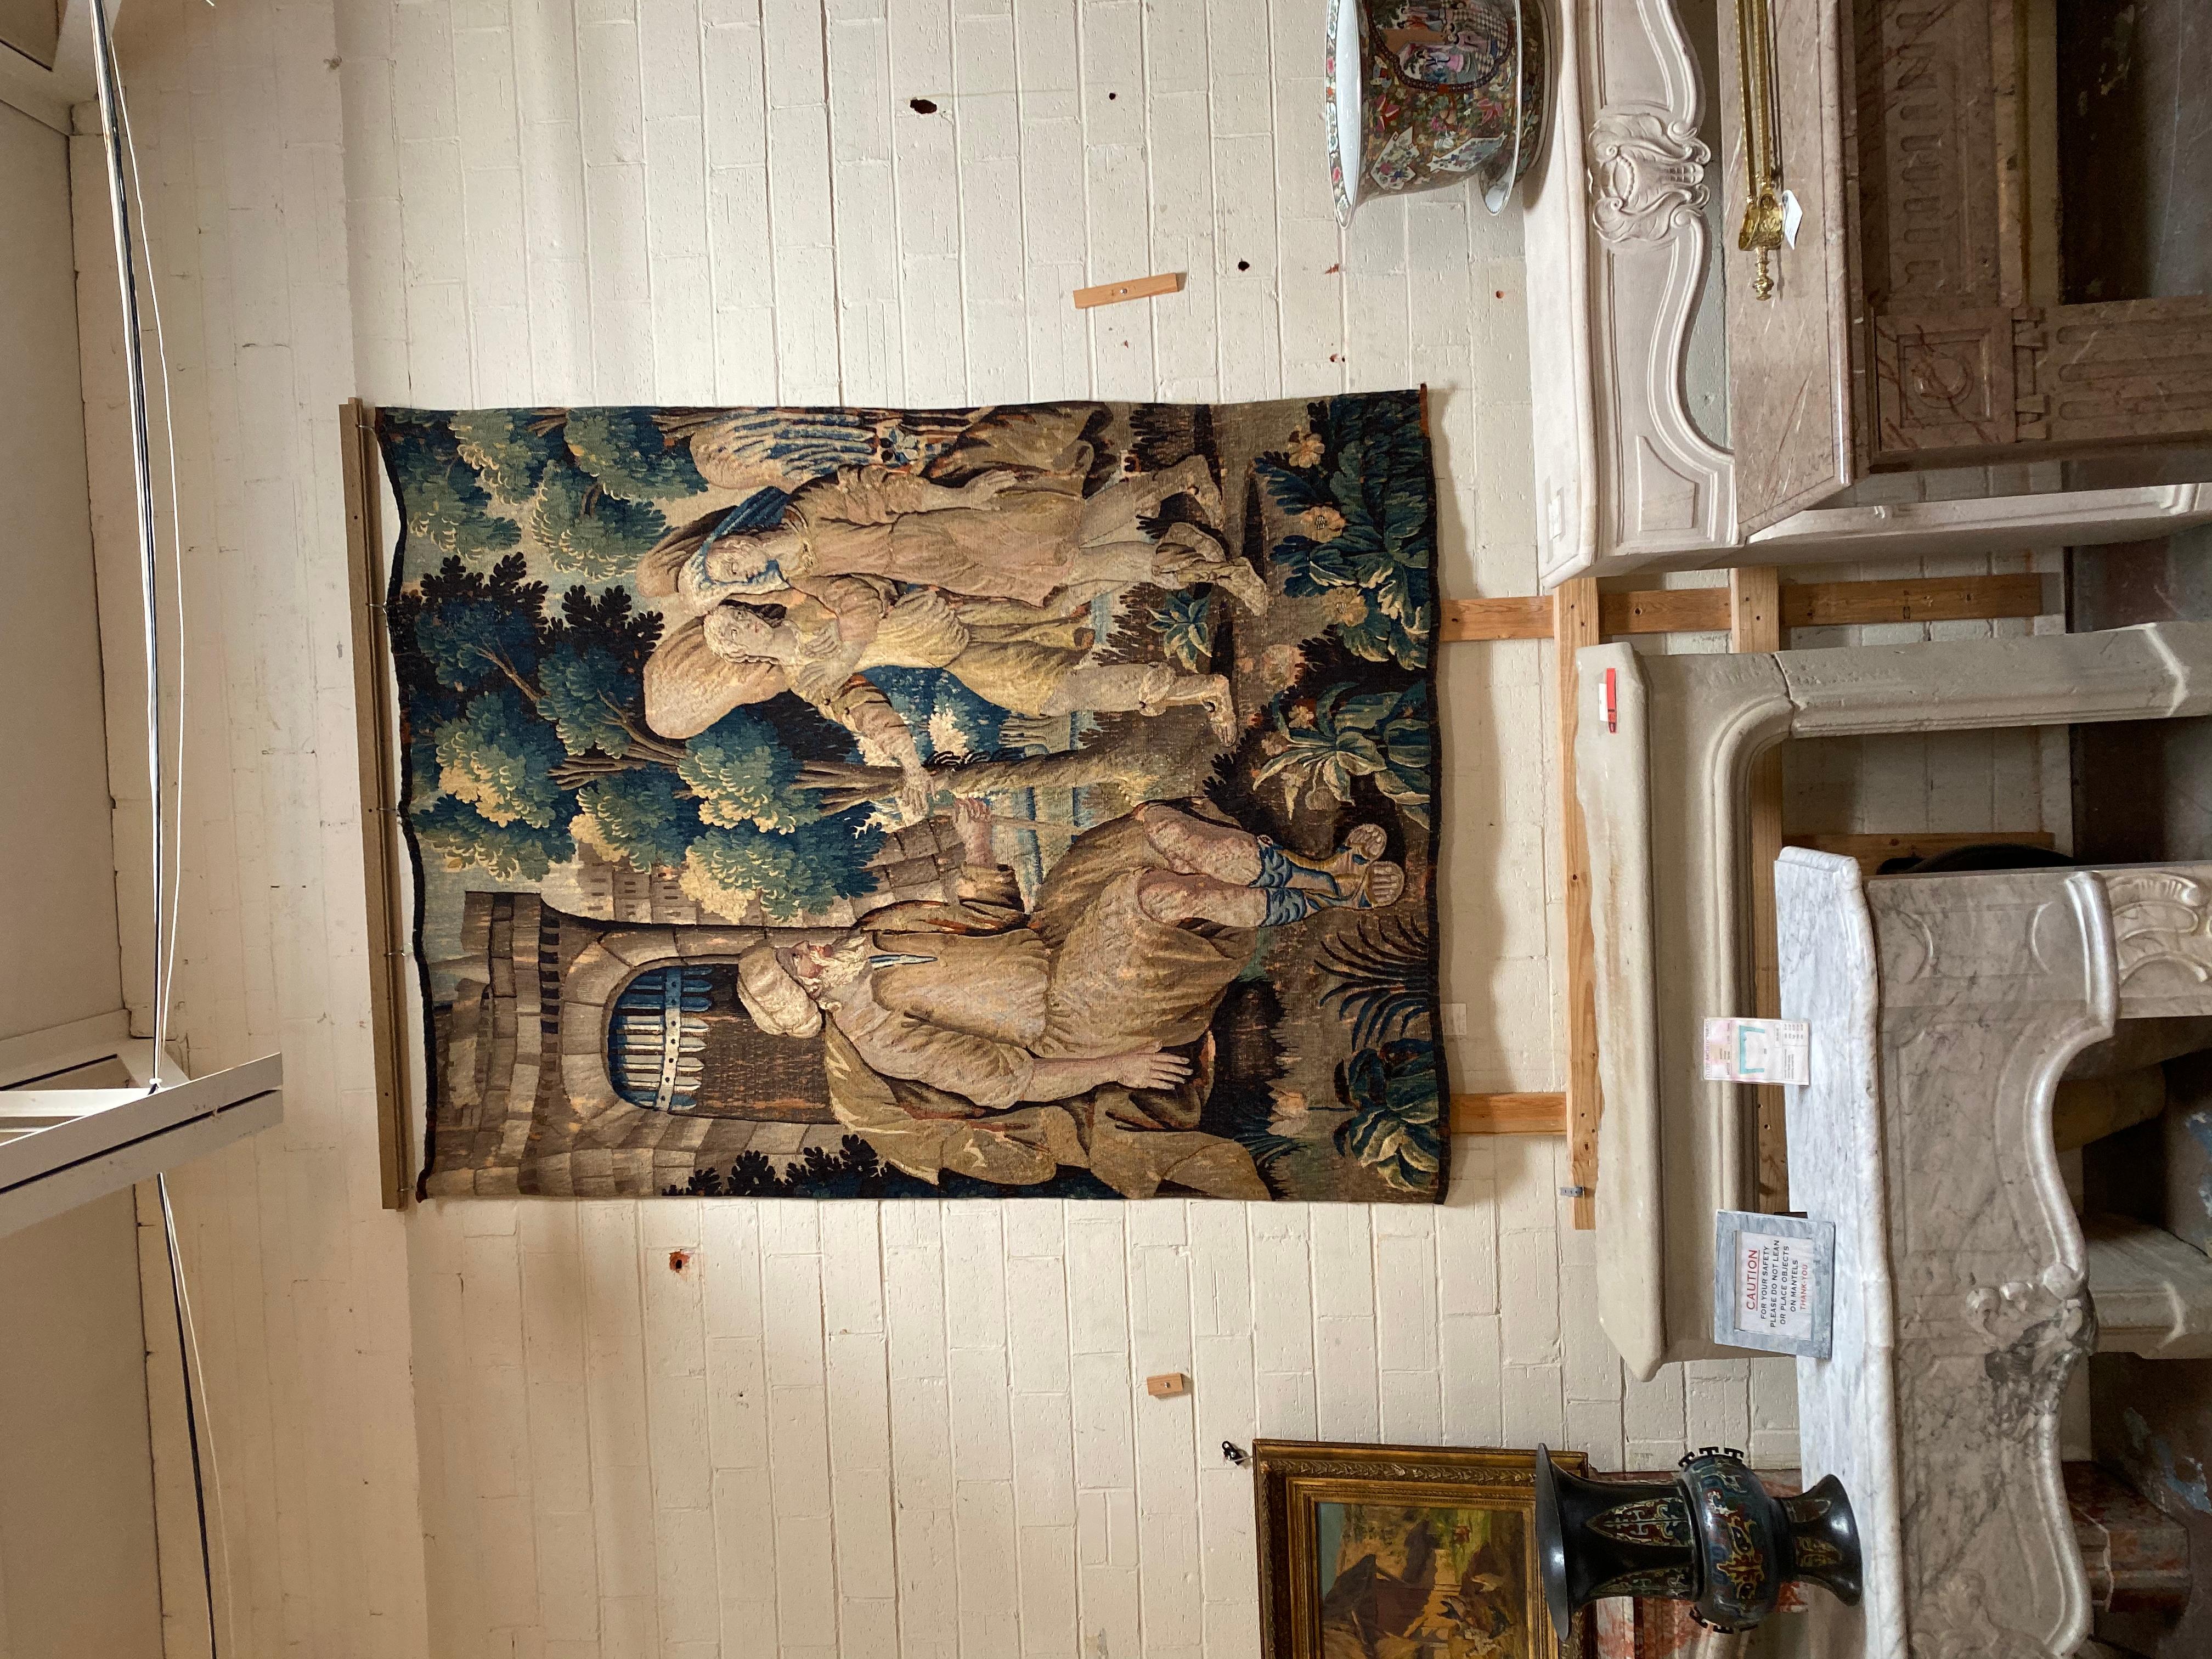 Beautiful Aubusson style tapestry with a nice design with a wise man sharing with young folk. Originates from France, circa 1720.

Measurements: 92